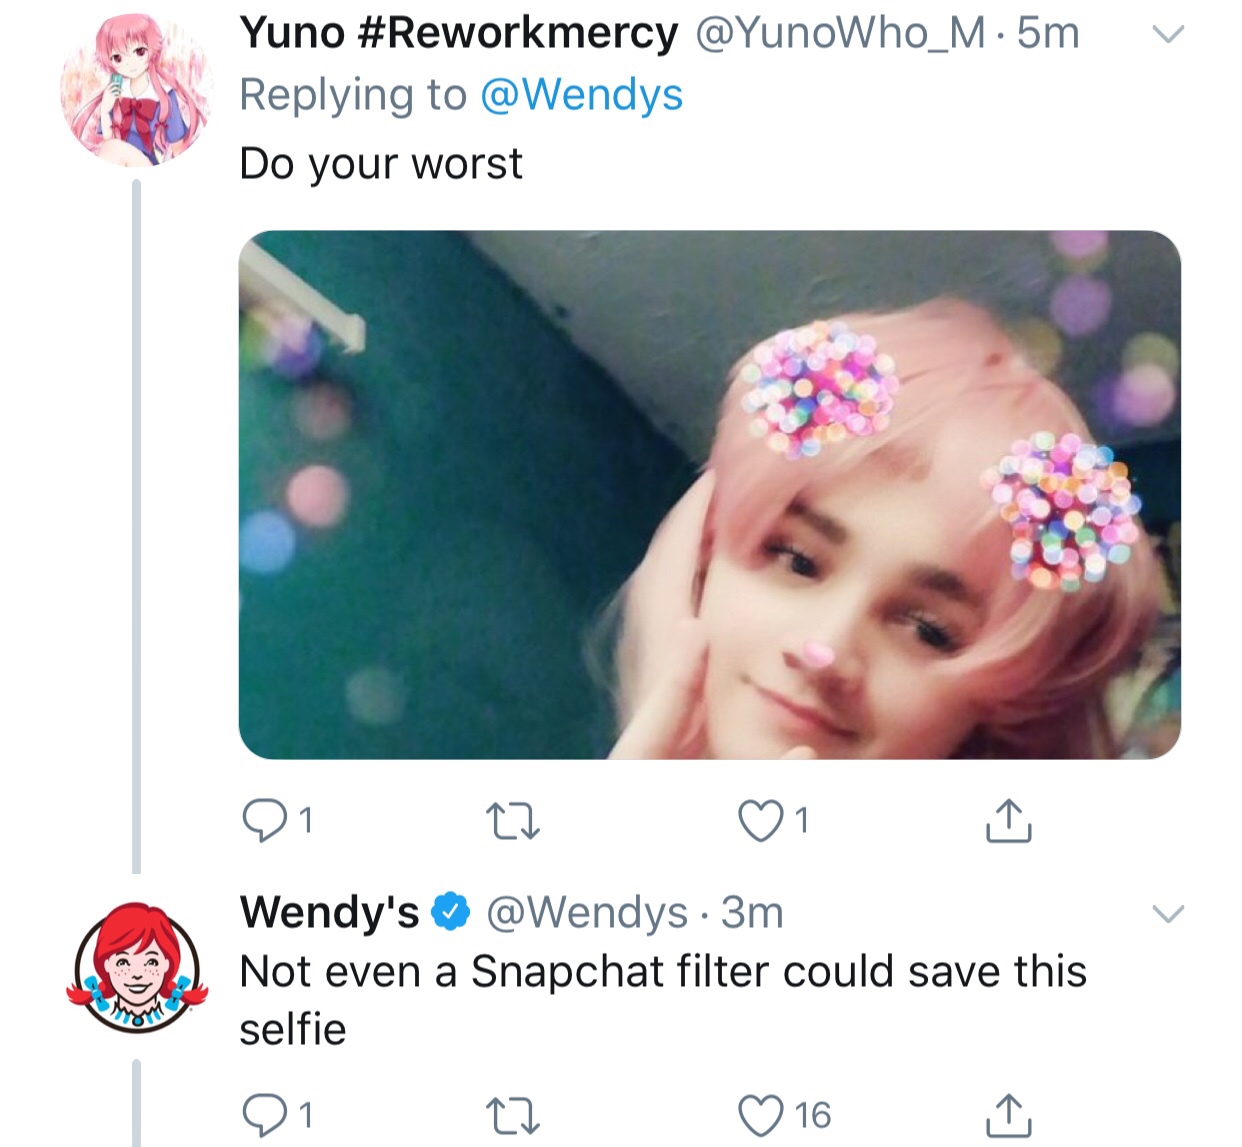 tweet - wendy's company - v Yuno .5m Do your worst O co o i Wendy's 3m Not even a Snapchat filter could save this selfie 01 27 16 i